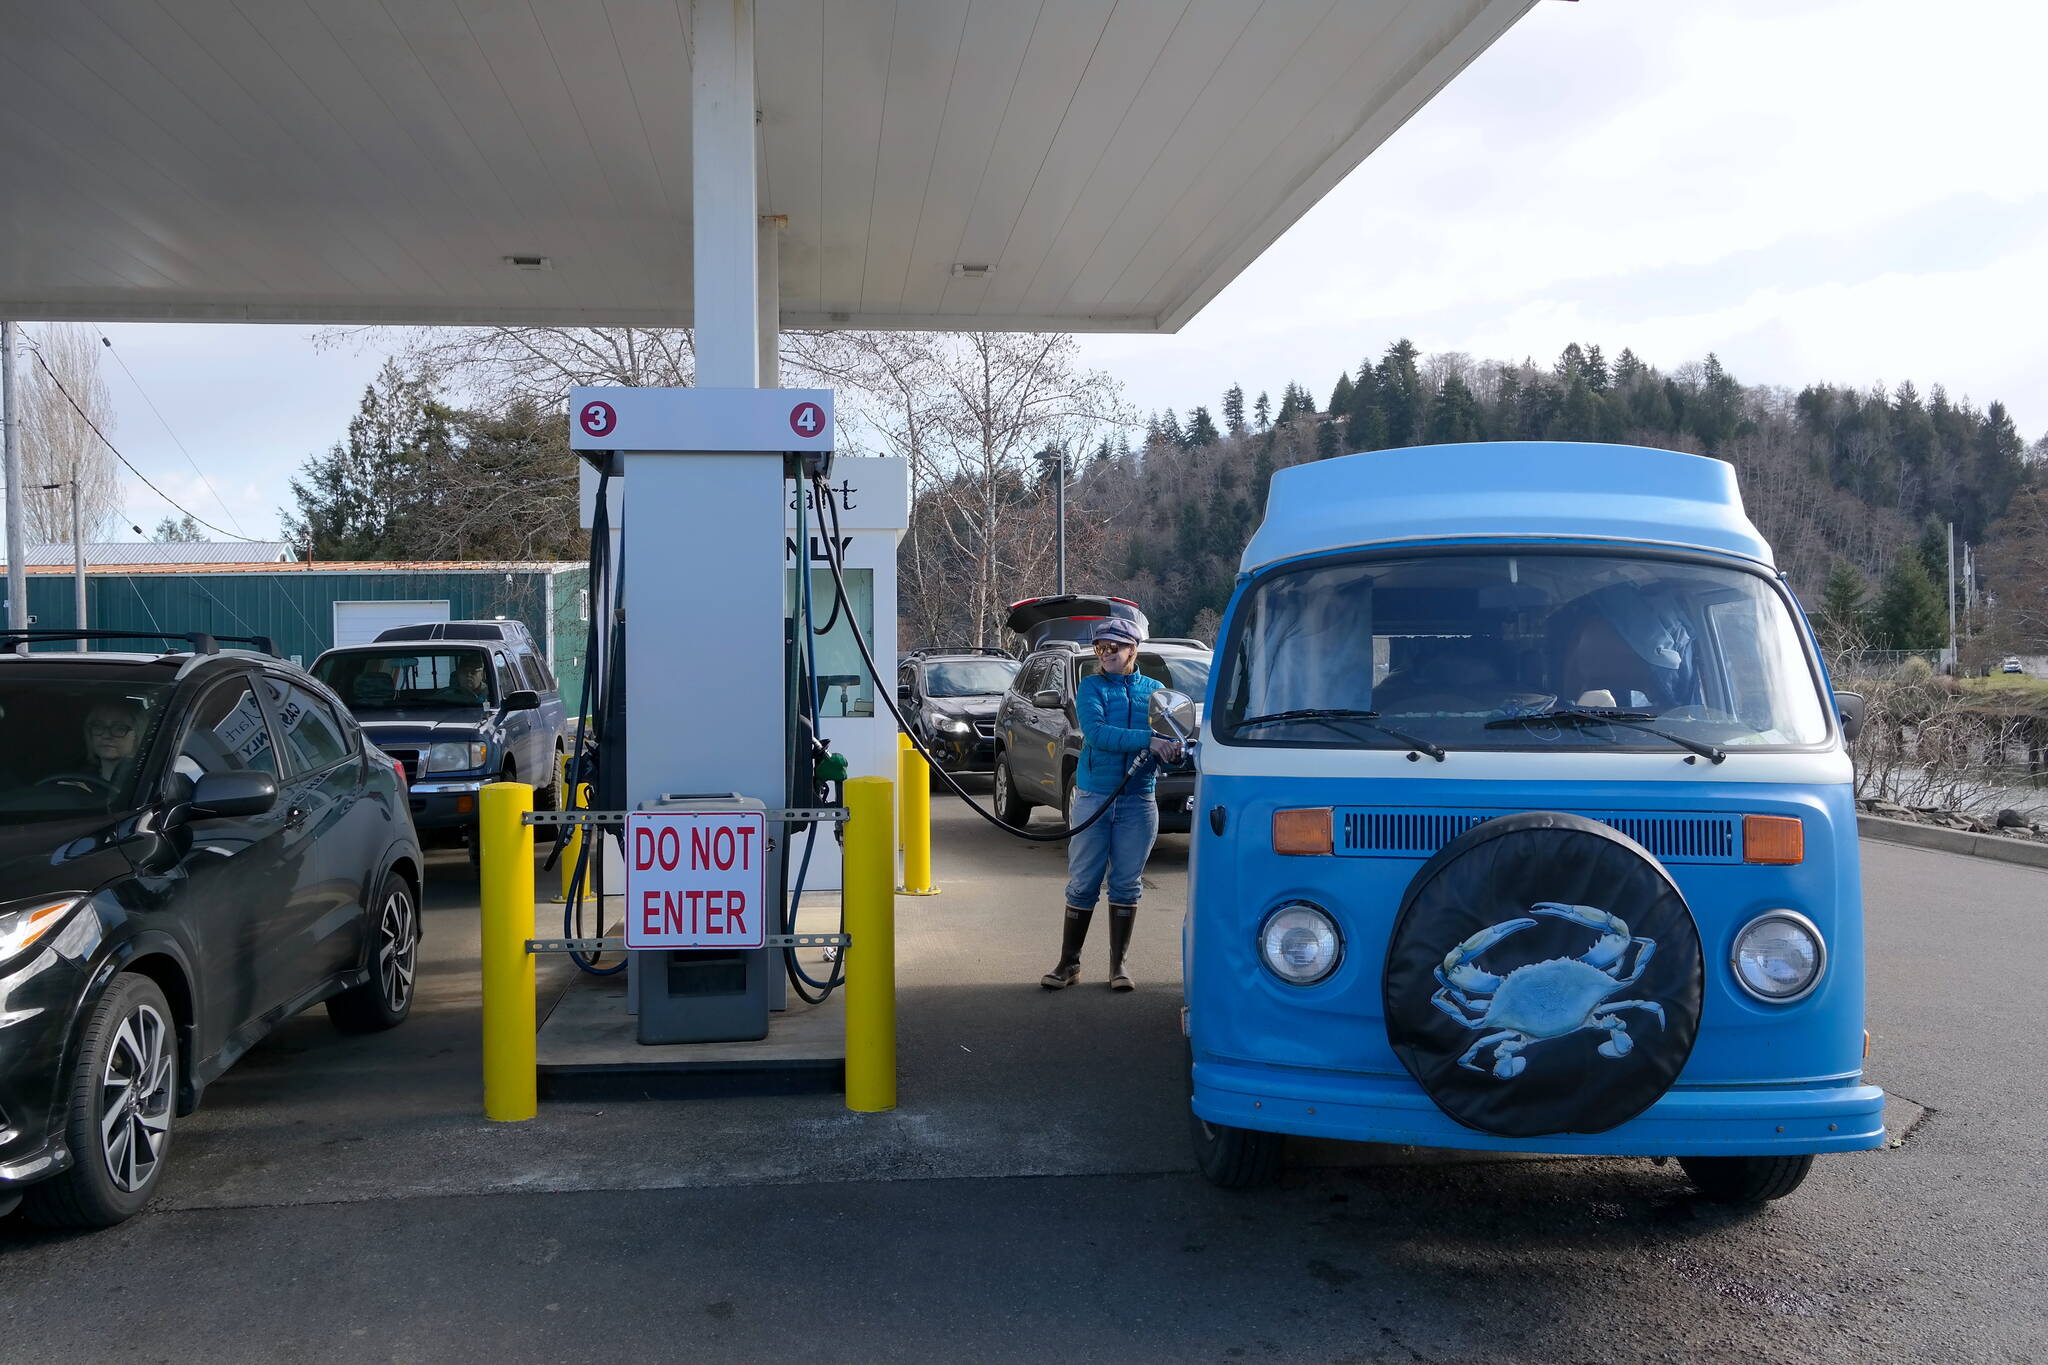 Erika Gebhardt I The Daily World 
Grays Harbor County resident Willow Jorgenson fills up at the Q-Mart in Aberdeen on Wedensday, March 9, 2022. Soaring gas prices are likely to alter her plans for excursions along the coast in the coming months.